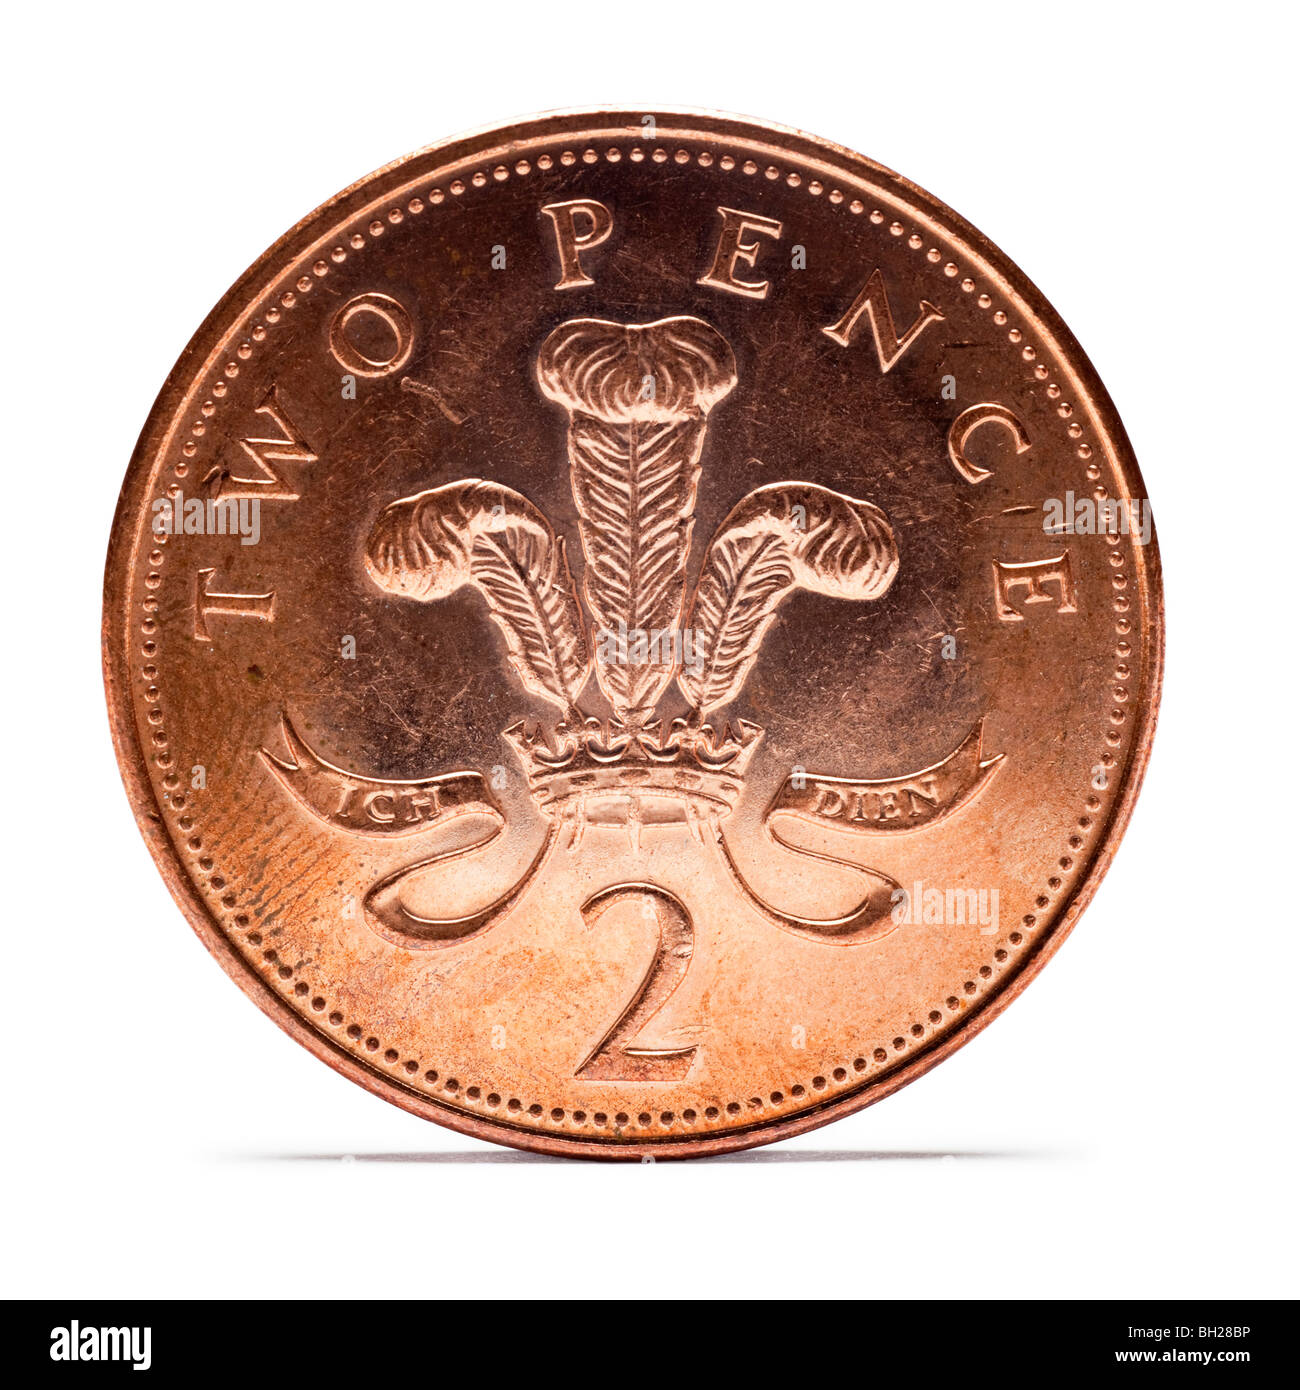 British Two Pence coin back view macro Stock Photo